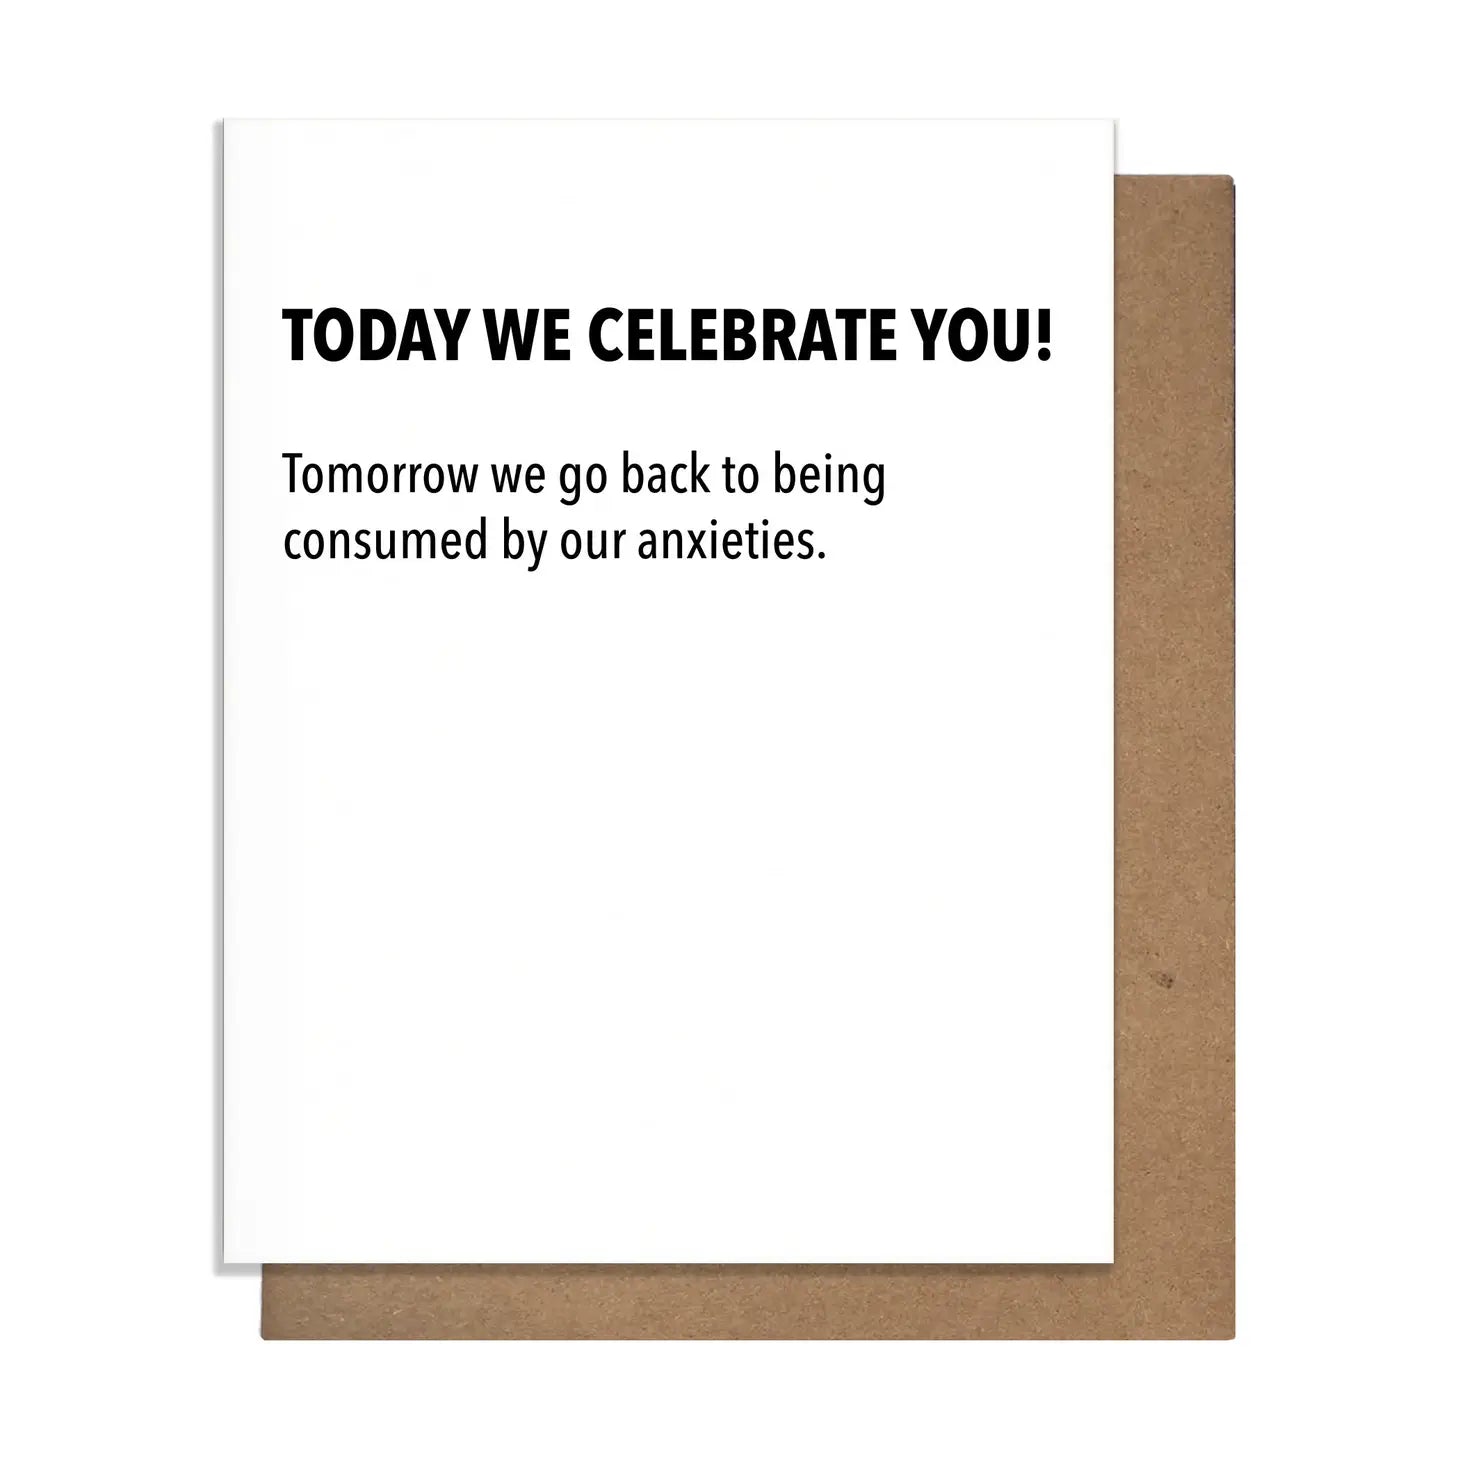 Pretty Alright Goods Greeting Card - Today We Celebrate You